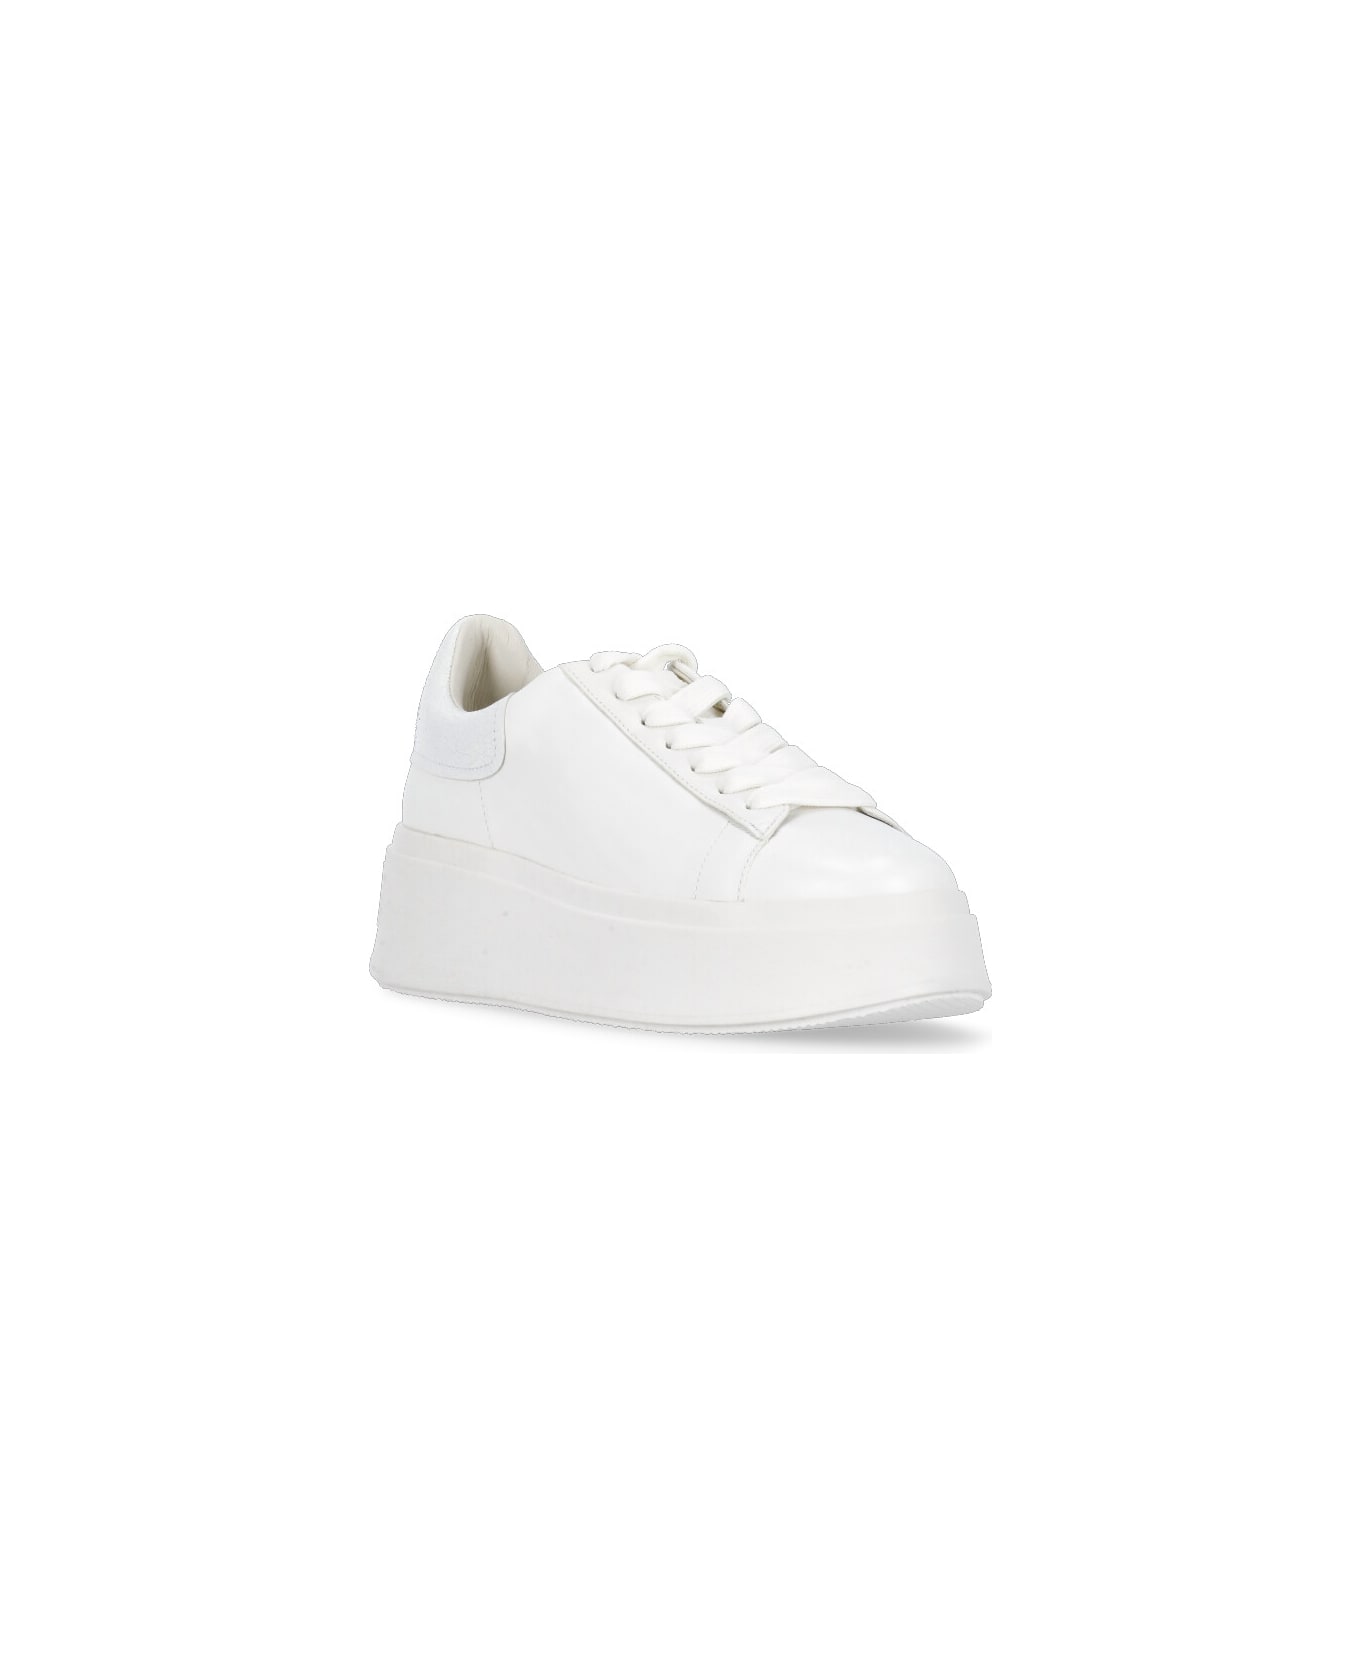 Ash Moby Be Kind Sneakers - White